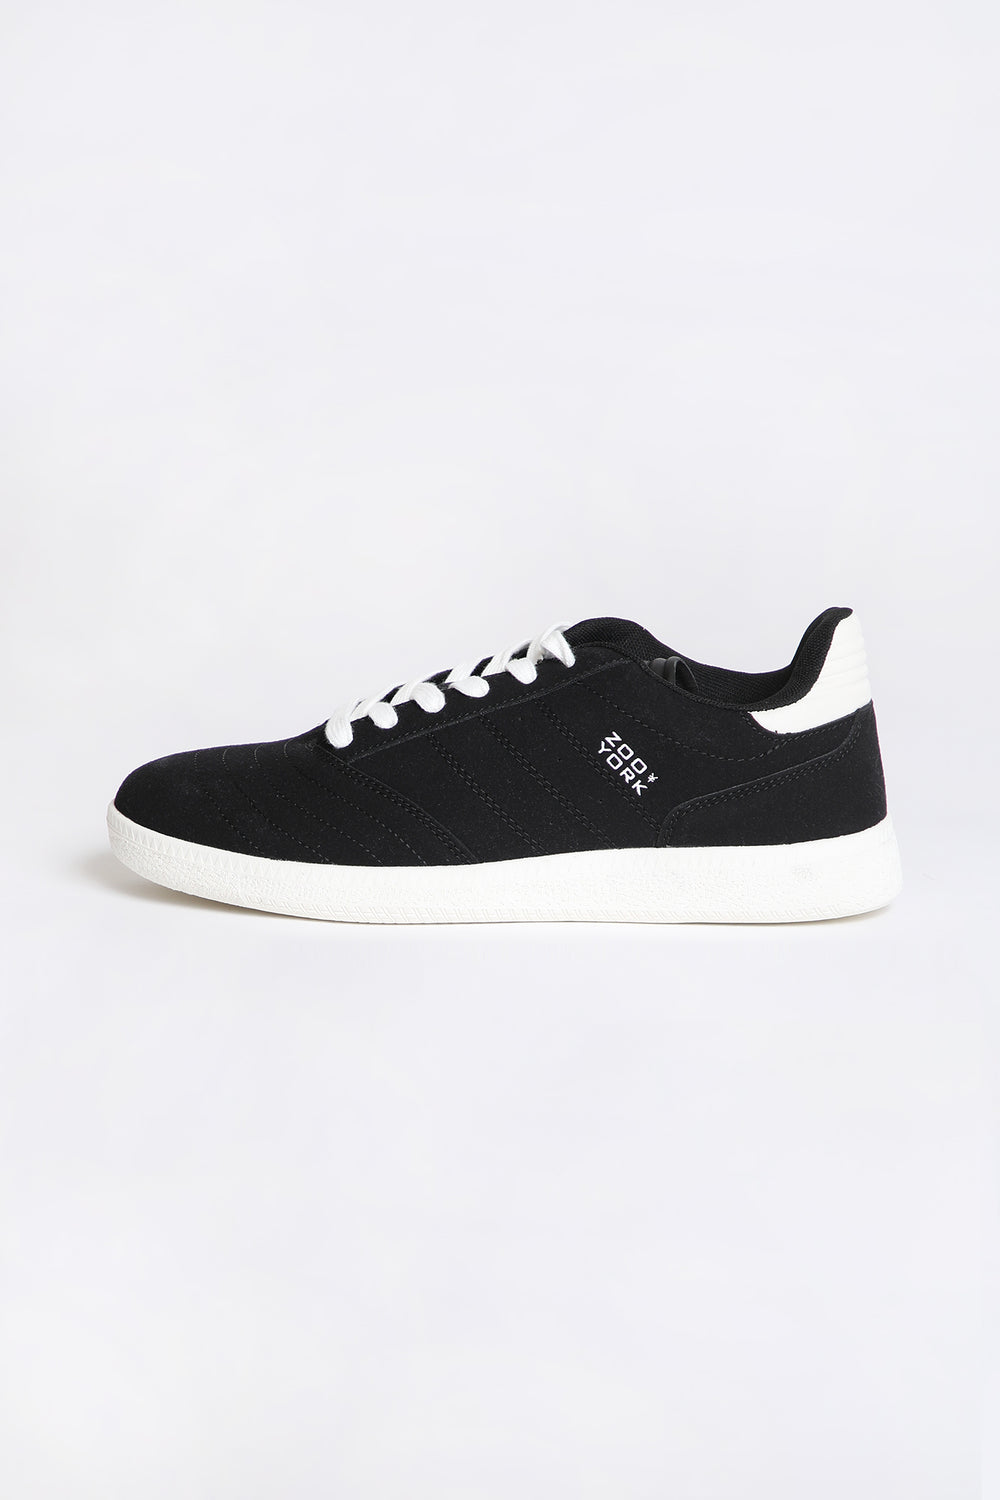 Zoo York Mens Pro Skate Shoes Black with White